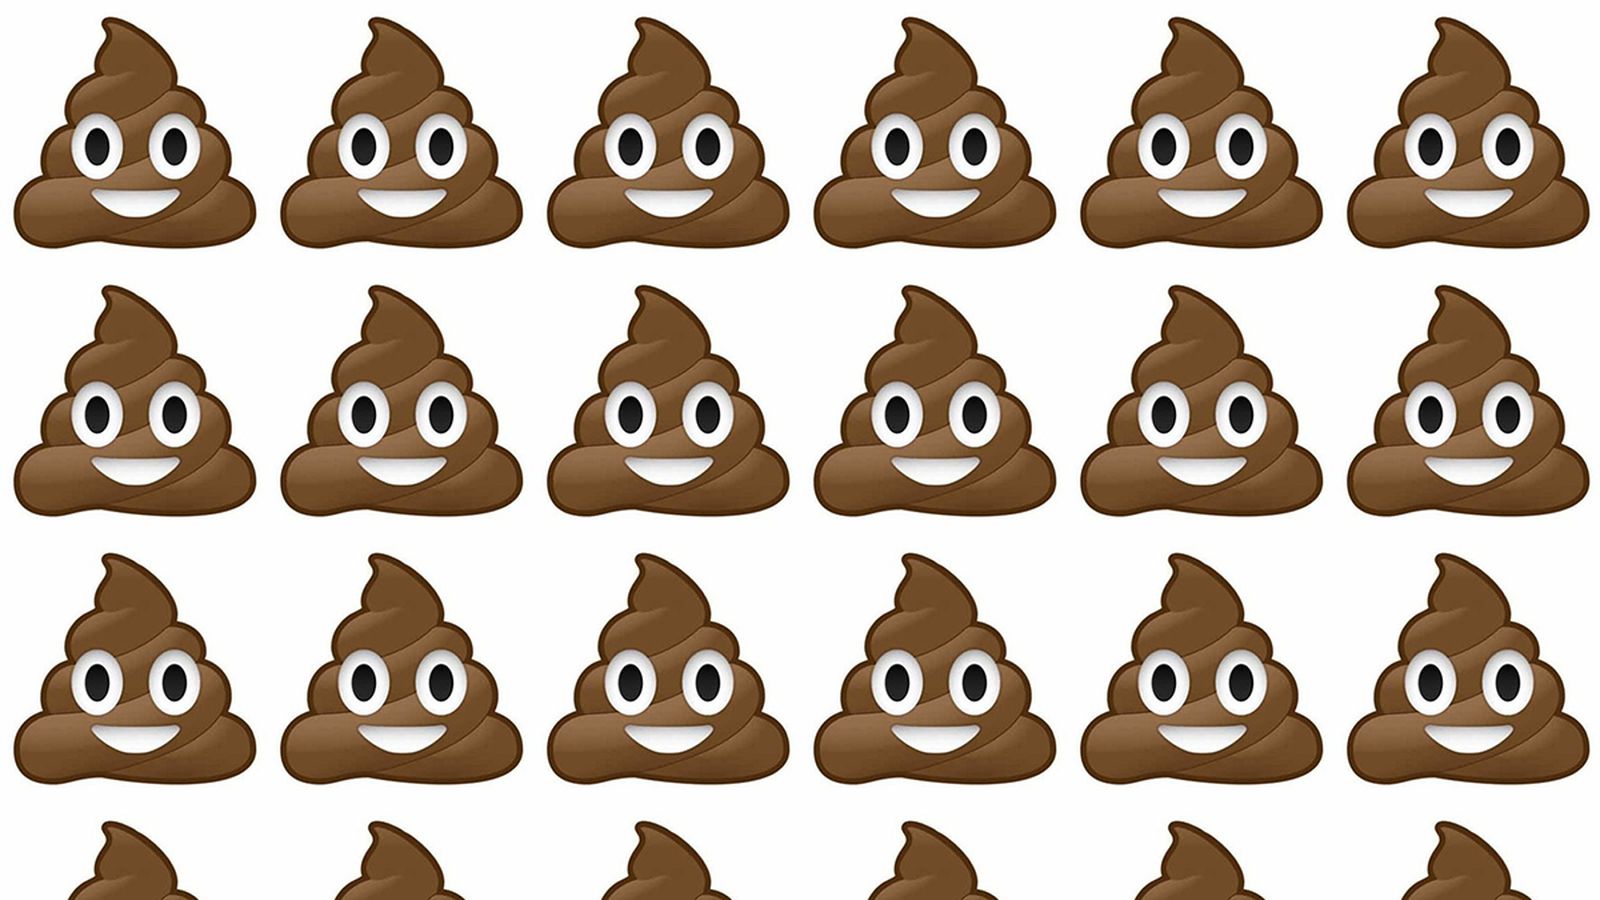 Poop HD Wallpapers and Backgrounds